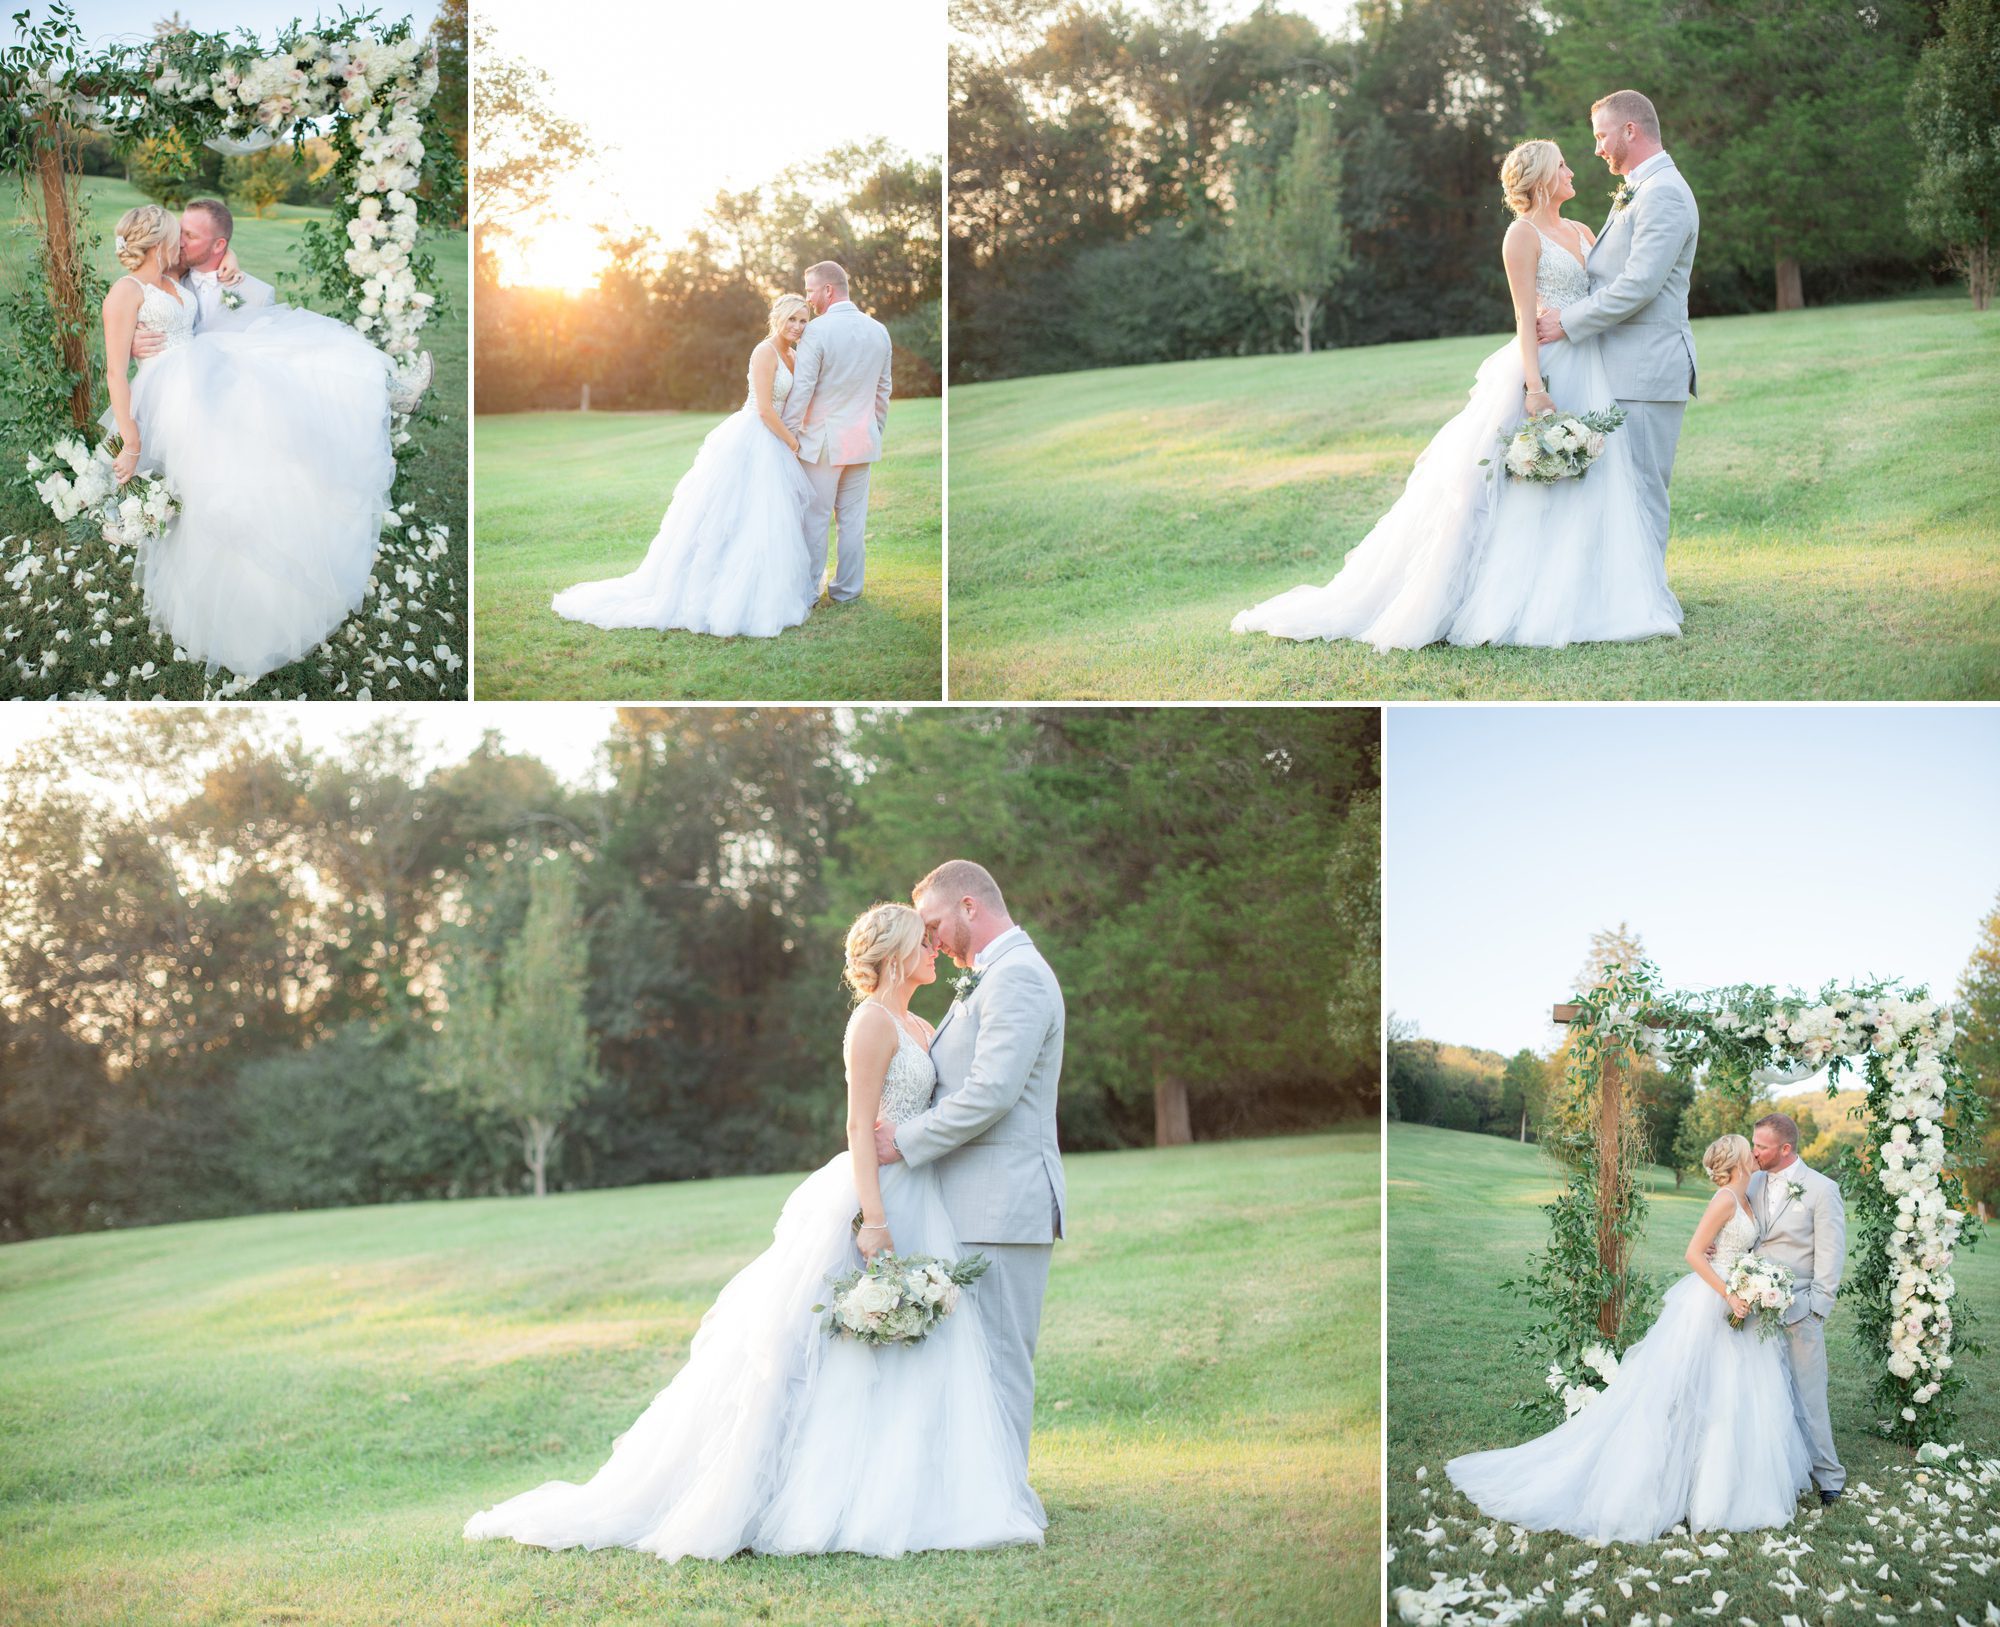 Photos of bride and groom at sunset after their wedding ceremony. Wedding photography at Cedarwood Weddings and Estate in Nashville, TN photography by Krista Lee Photography